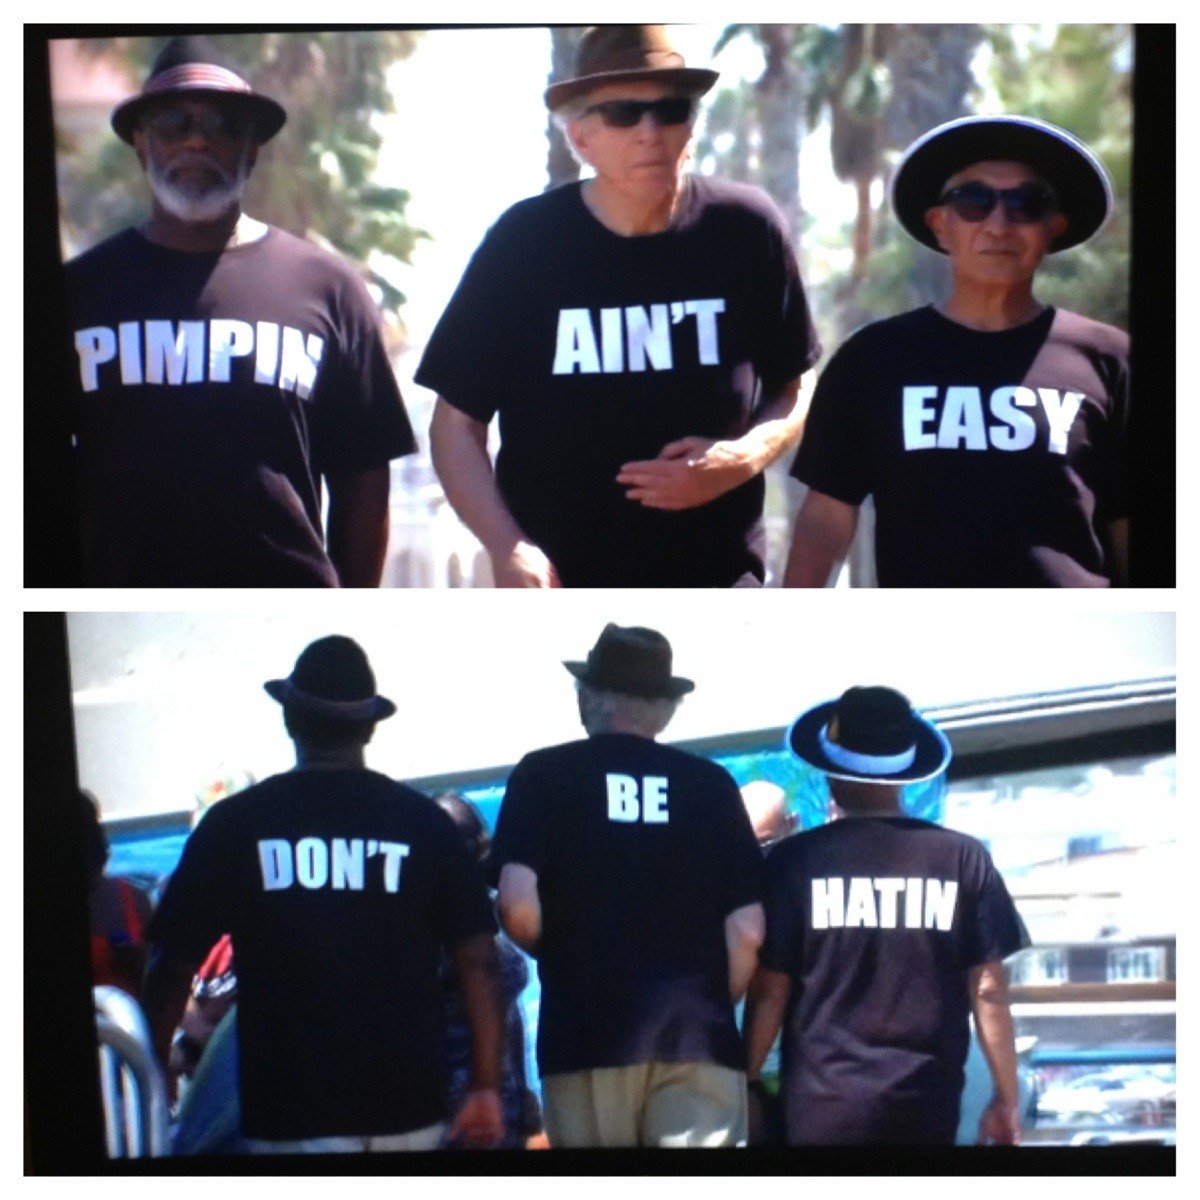 Funny Old Men Wearing Pimpin Ain’t Easy Tshirt